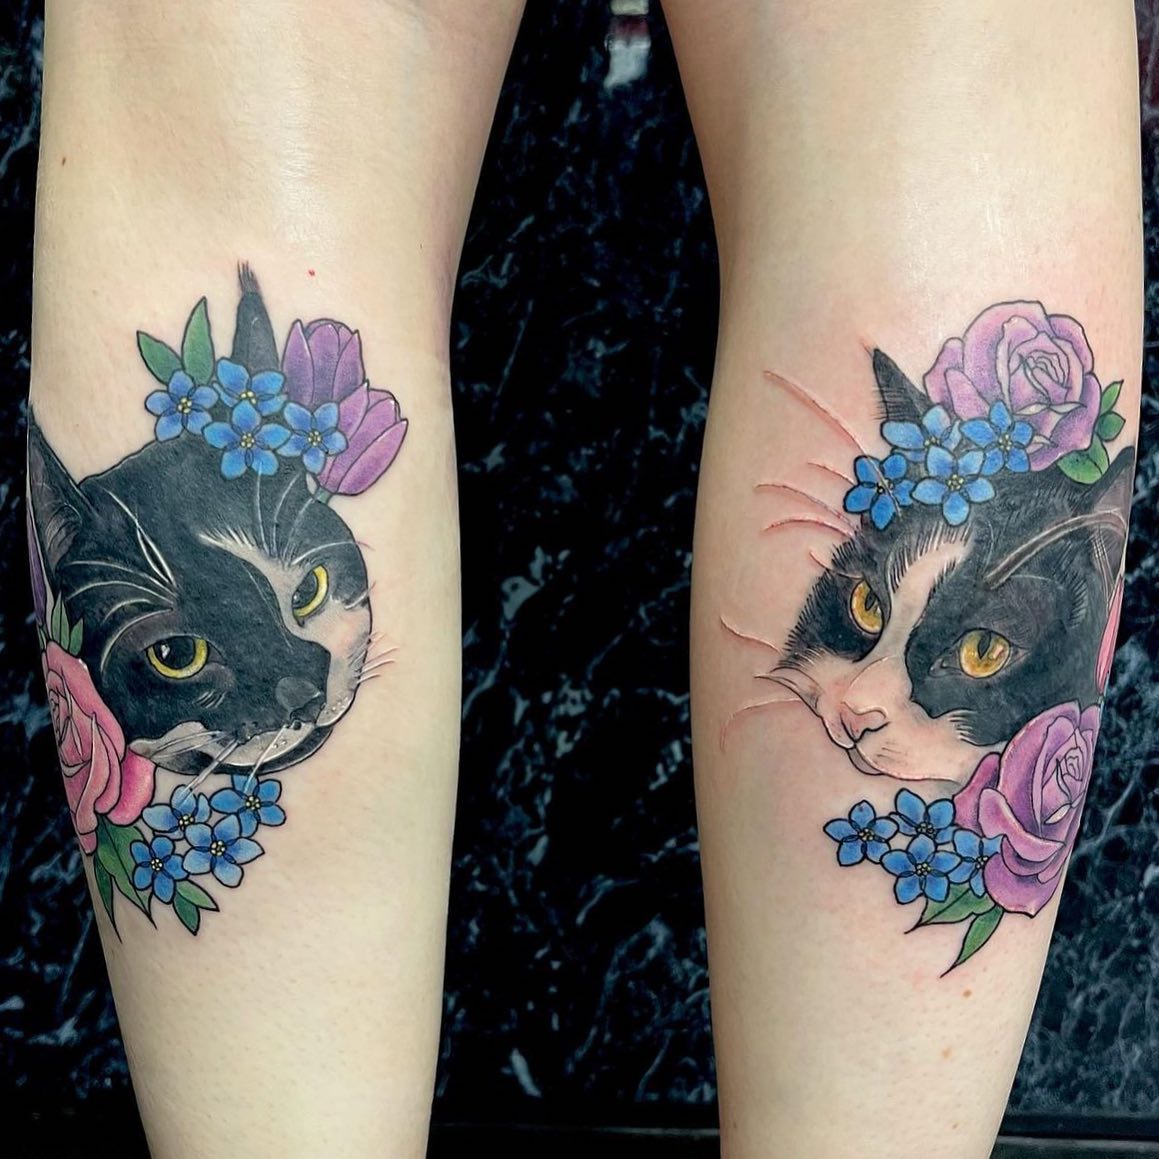 Cutest couple of cats by our lovely courtenaydicksontattoo 🐱💕

If you'd like to get tattooed by Courtenay, send her a message or fill out a tattoo enquiry form! 

                         totaltattoo barber_dts easytattoo_uk eternalink dynamiccolor lockdownneedle stencilstuff    